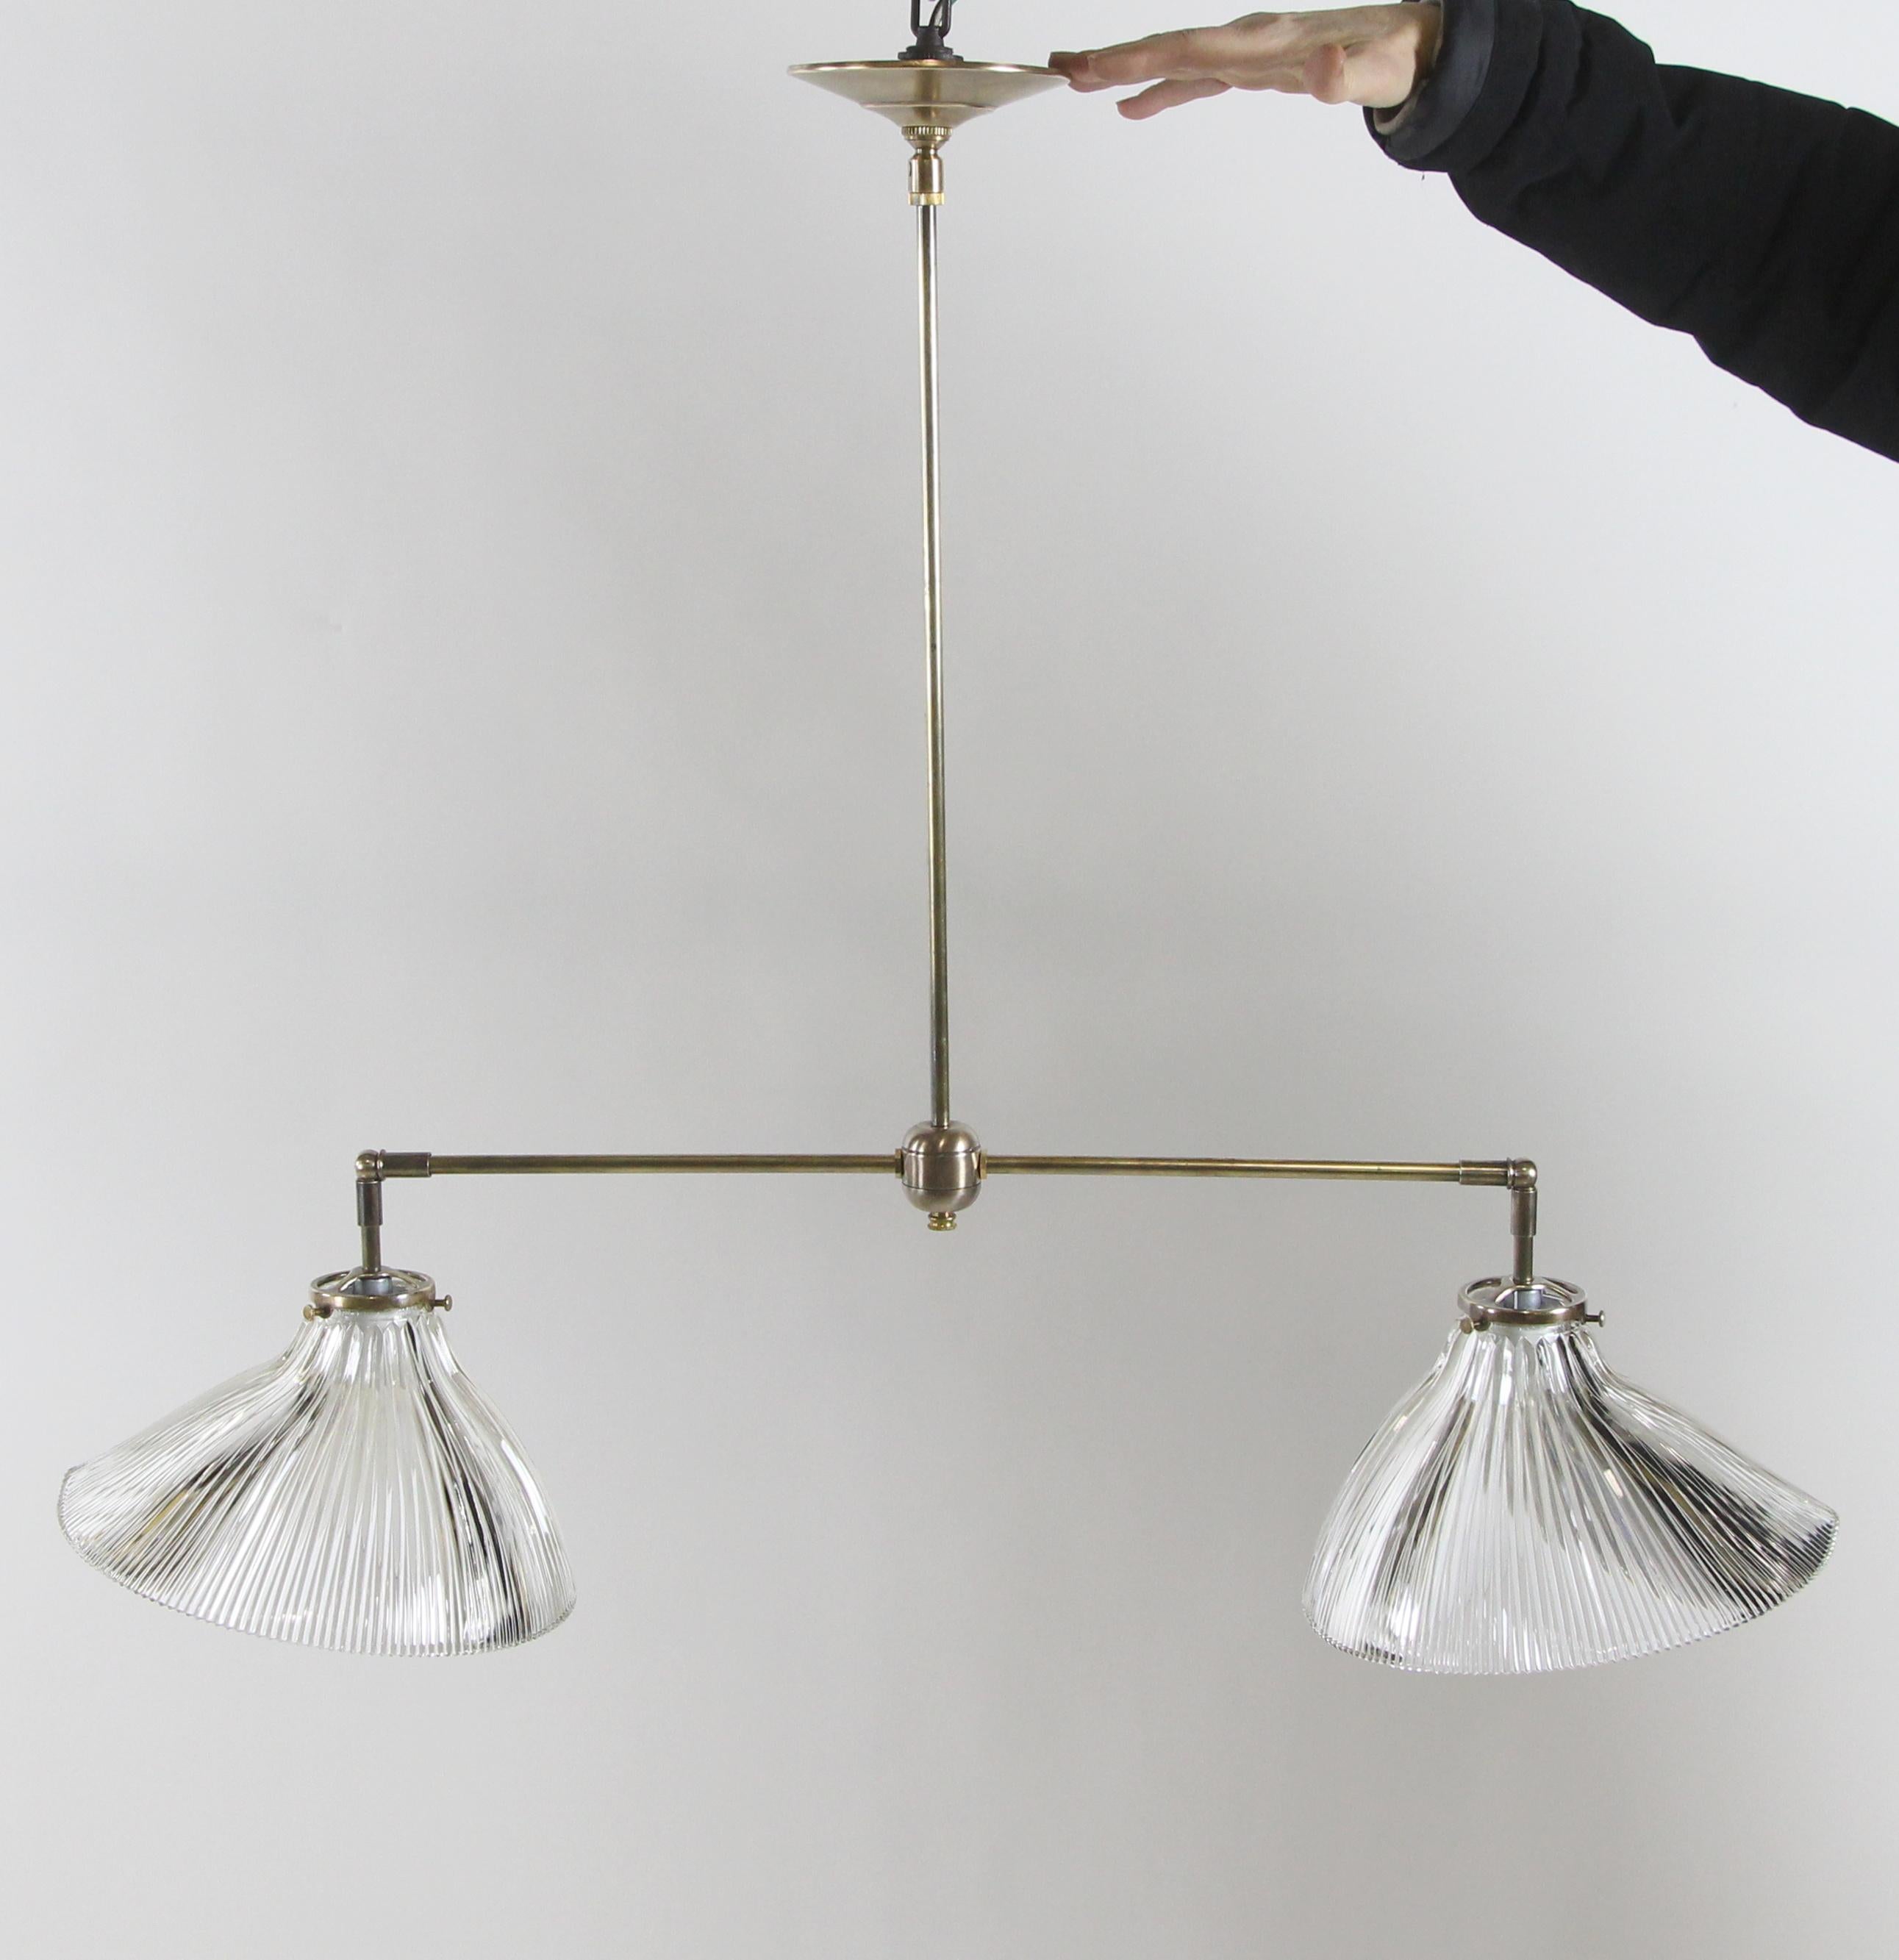 2010s new brass double pendant light fixture with antique clear prism glass Holophane shades. Antique brass finish. Cleaned and rewired. Small quantity available at time of posting. Priced each. Please inquire. Please note, this item is located in